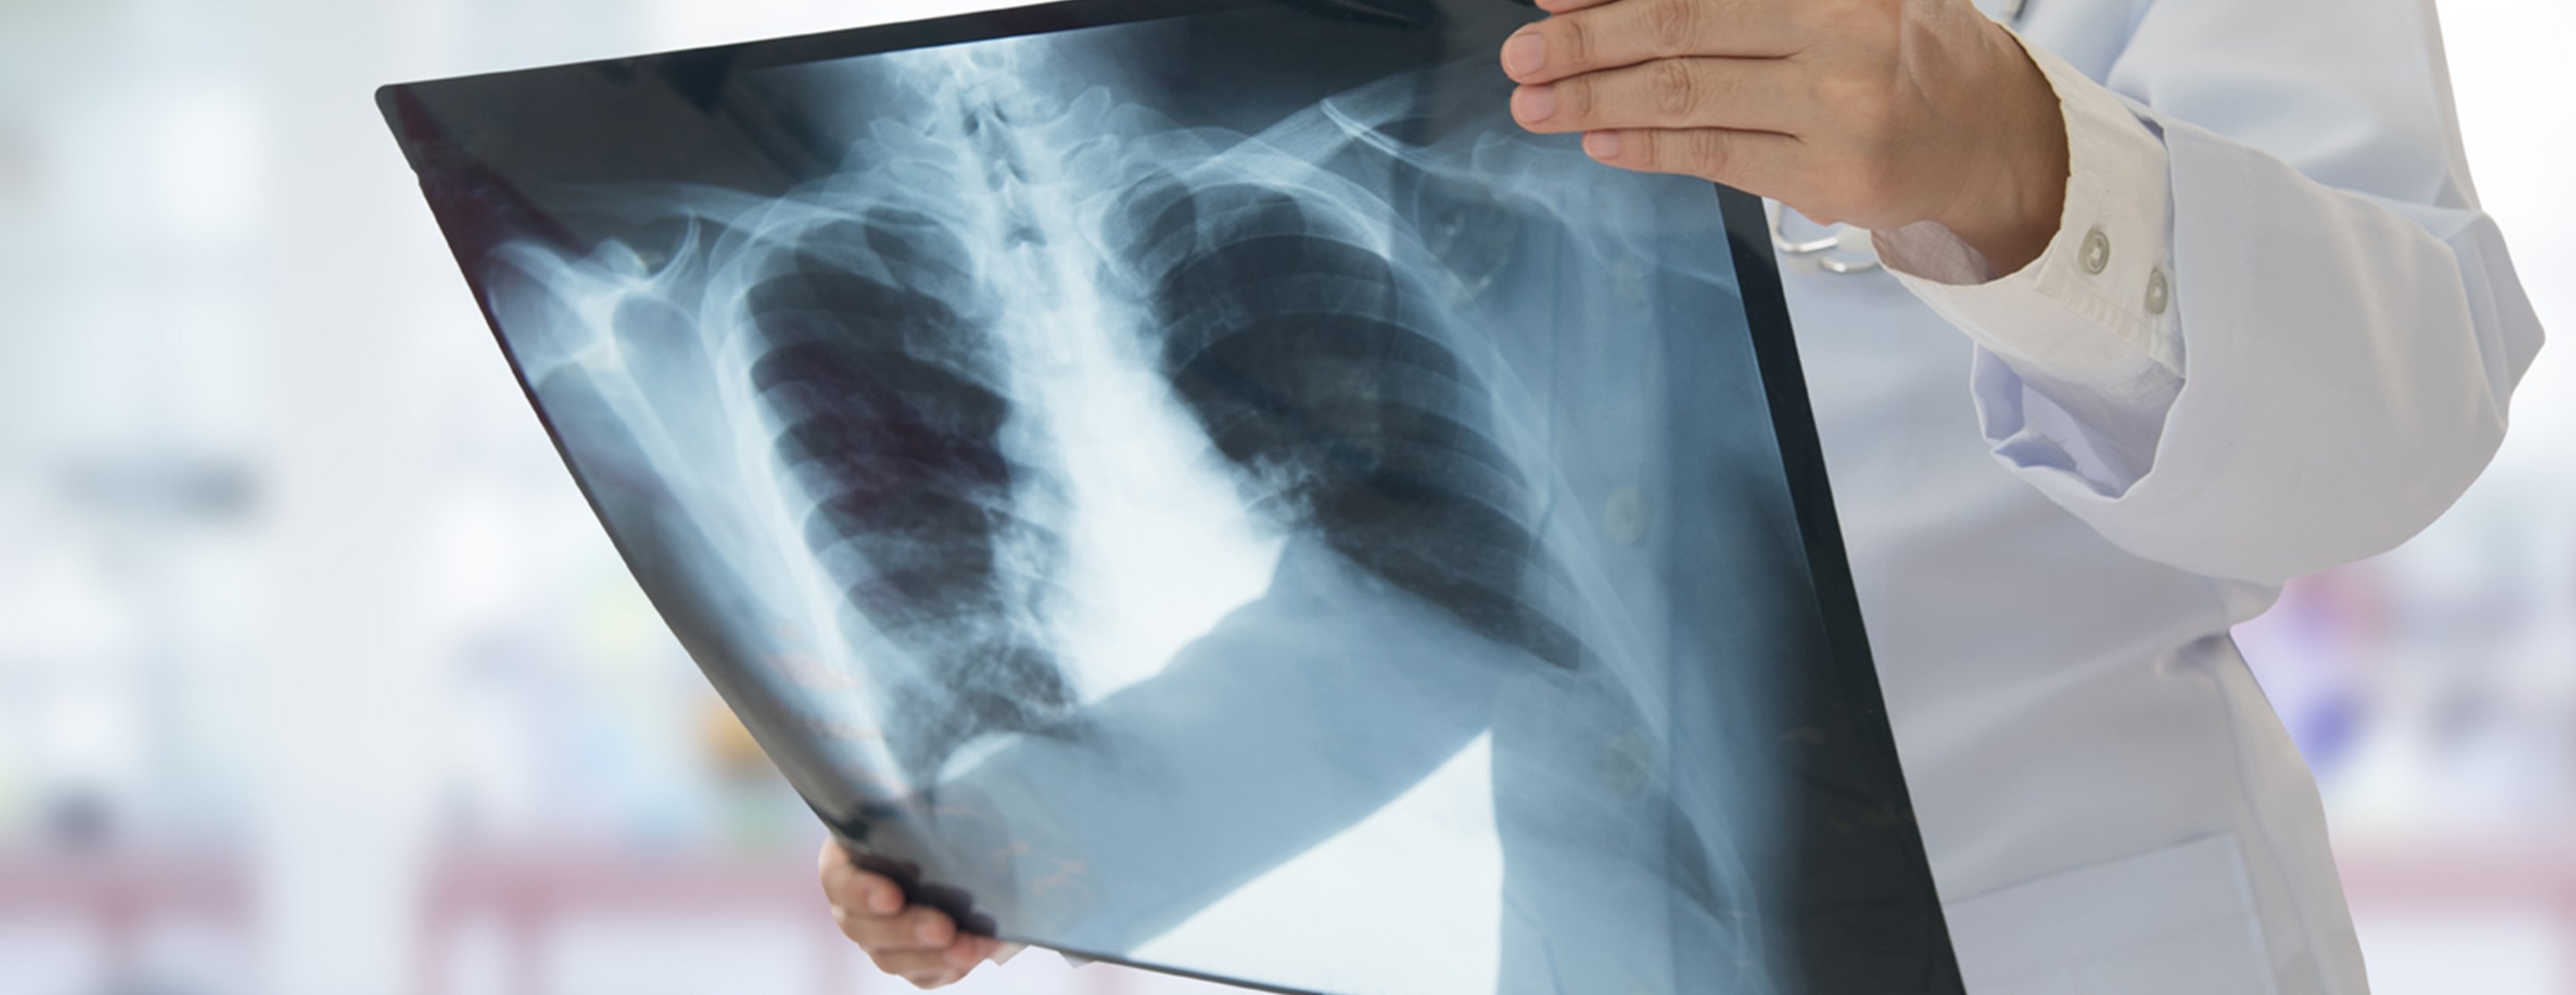 Urgent Care That Does Chest X Rays Near Me Tricheenlight